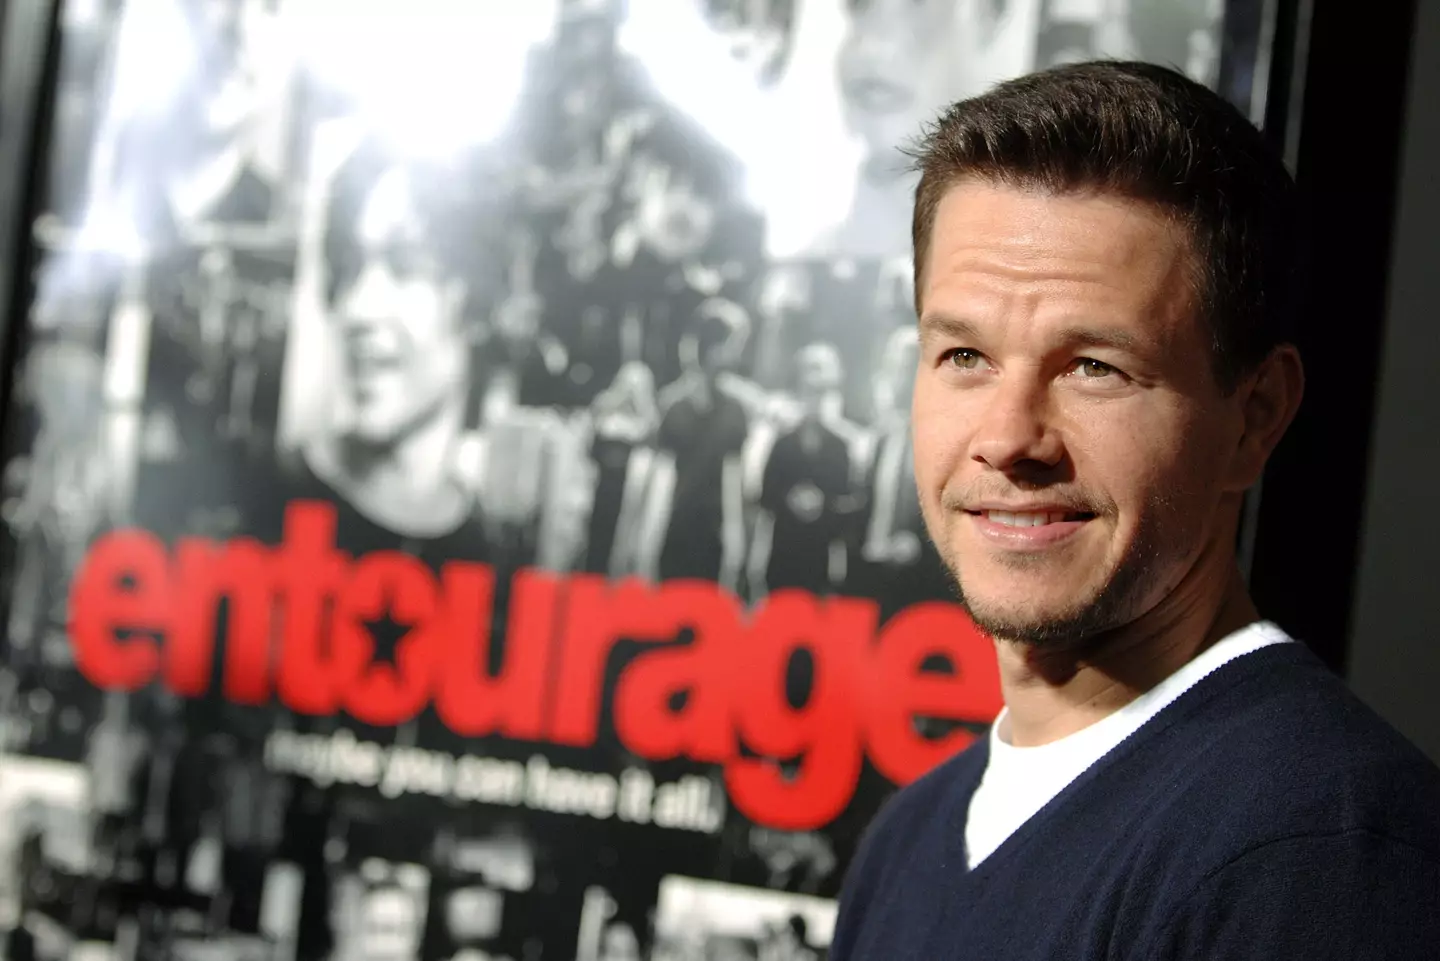 Mark Wahlberg attends the premiere Entourage season 3 in 2007.